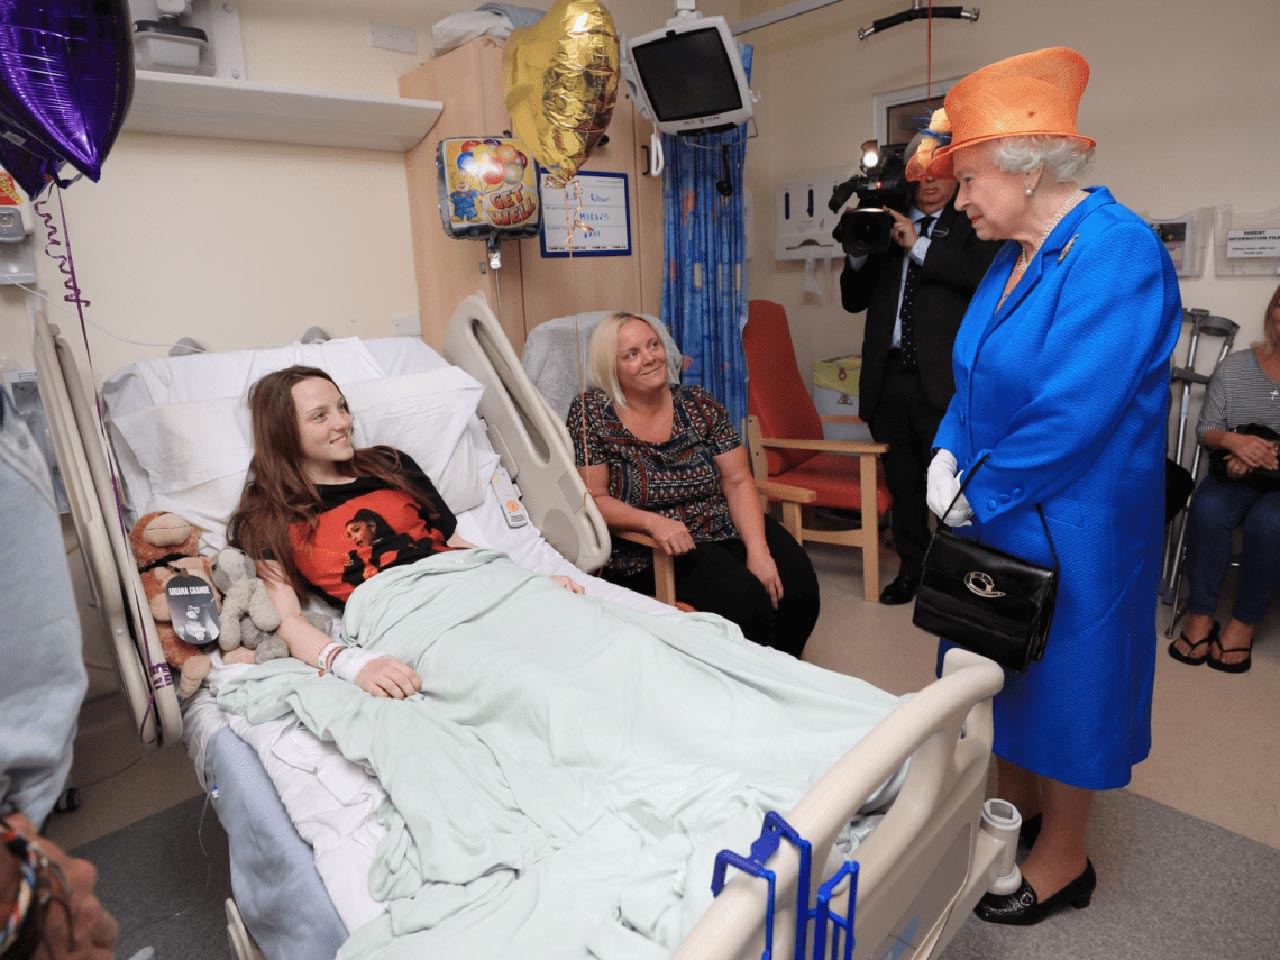 22 Photos From 2017 That Tell A Story: Queen Elizabeth is paying a visit to the Royal Manchester Children's Hospital and speaking to 15-year-old Millie Robson after Manchester Arena bombing.